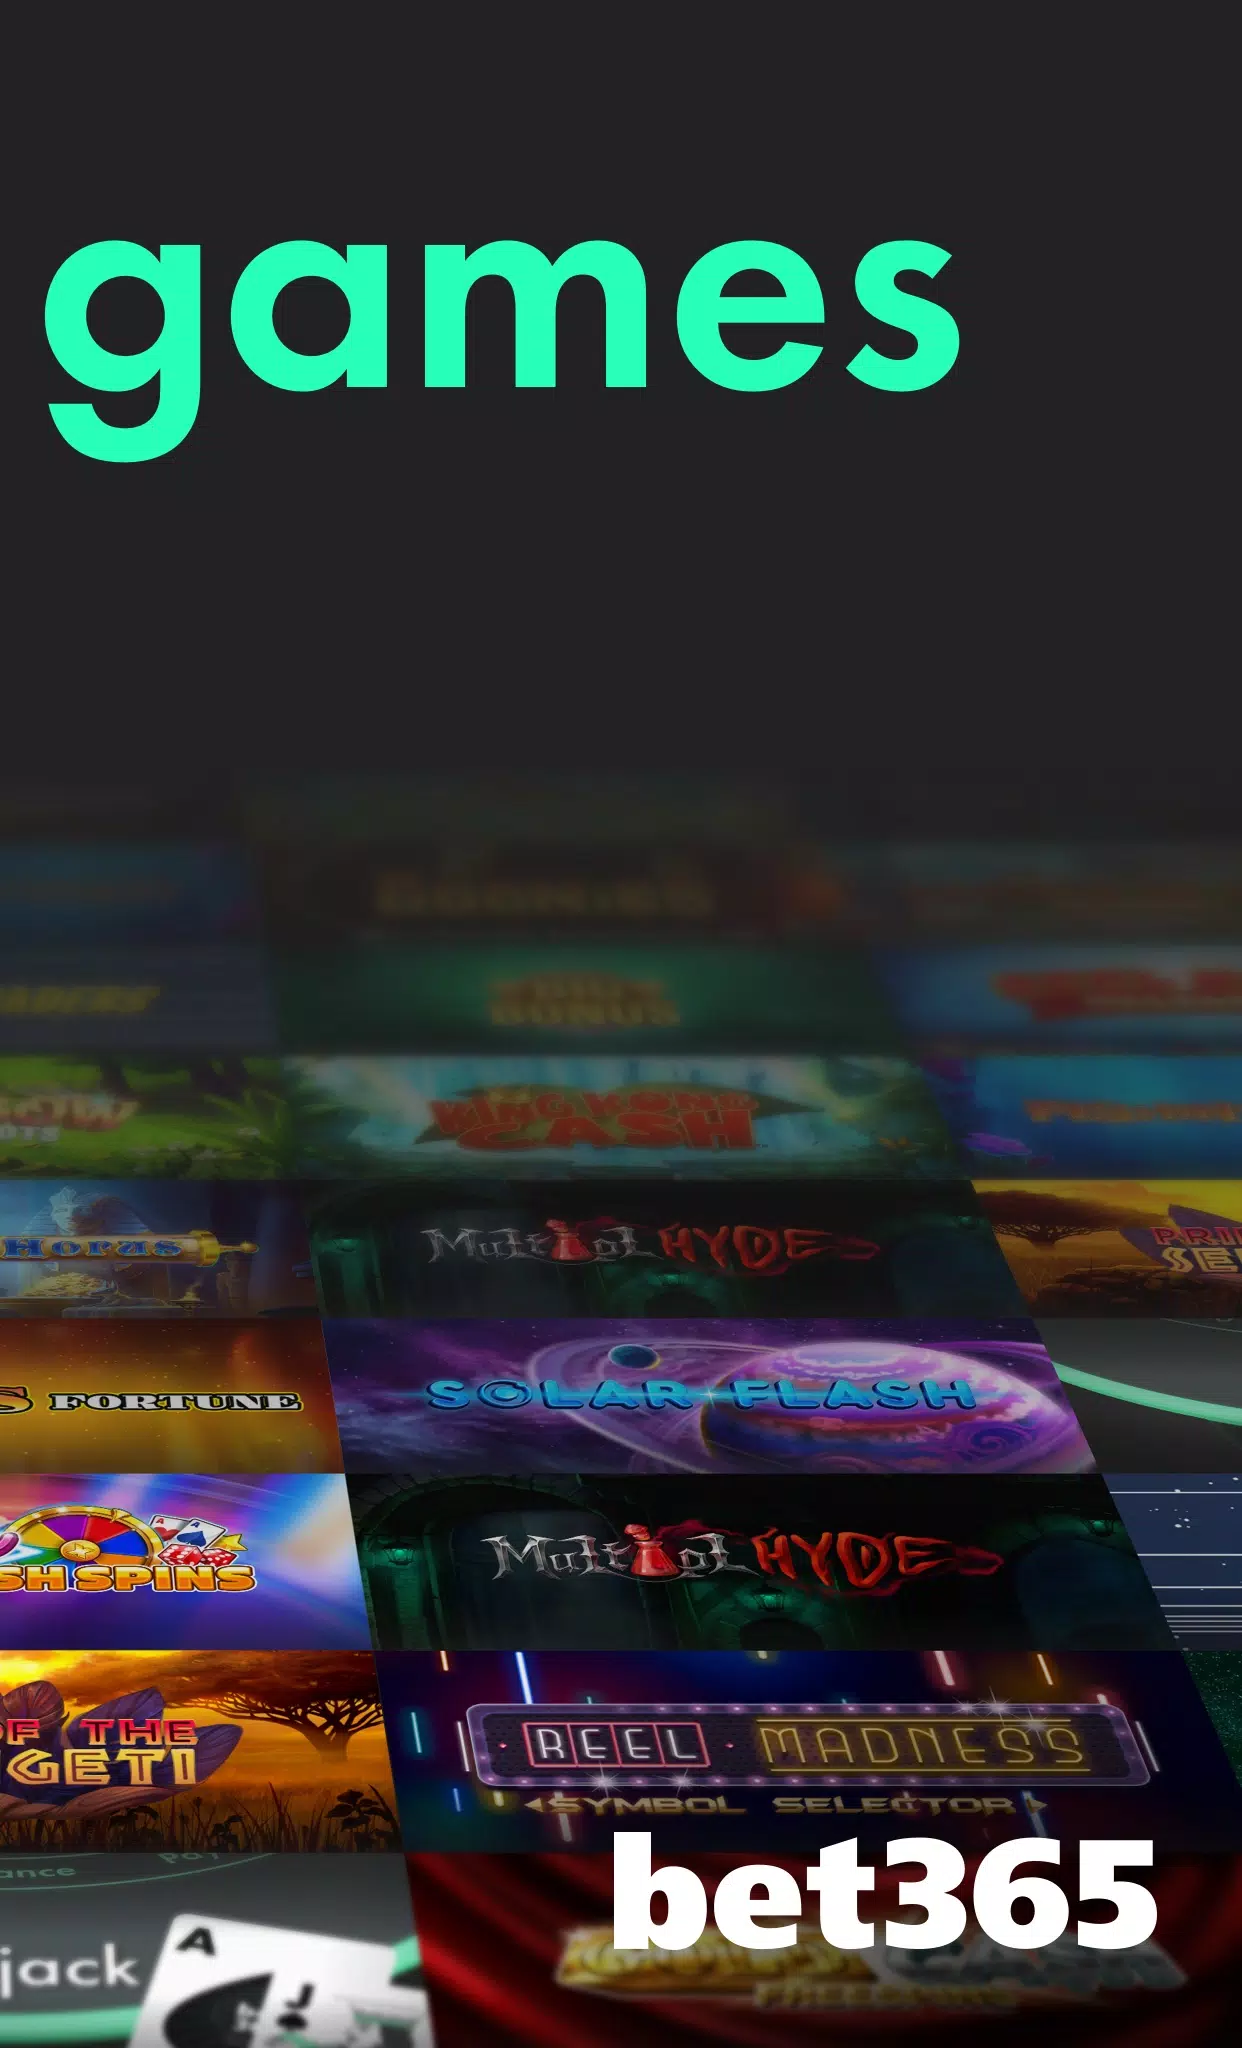 bet365 Games Play Casino Slots - Apps on Google Play